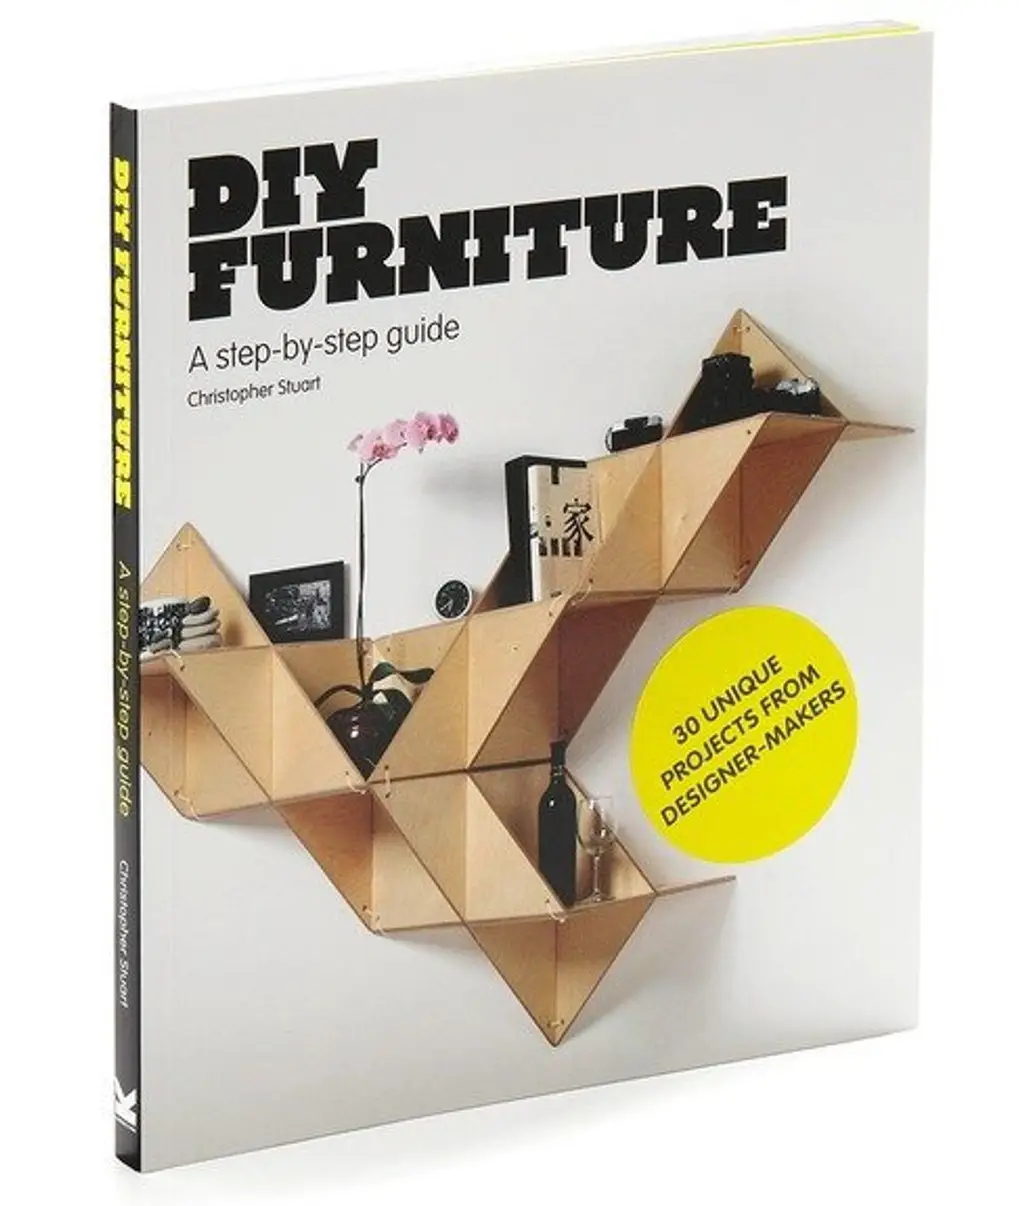 DIY Furniture: a Step-by-Step Guide